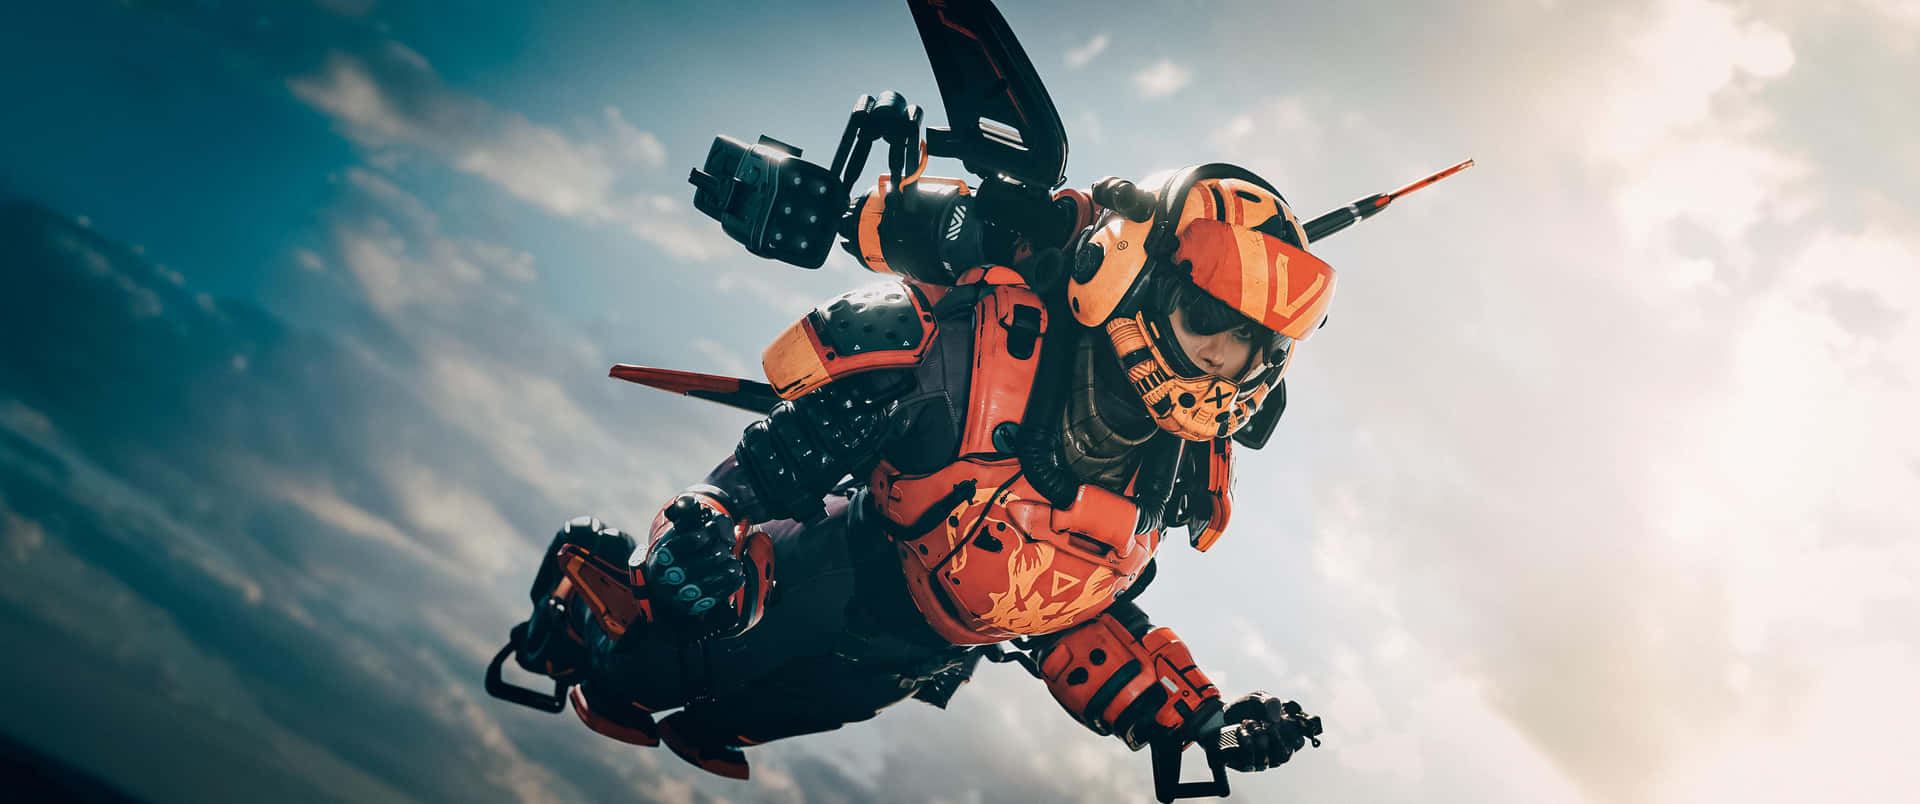 "Take the Skies with Valkyrie in Apex Legends" Wallpaper